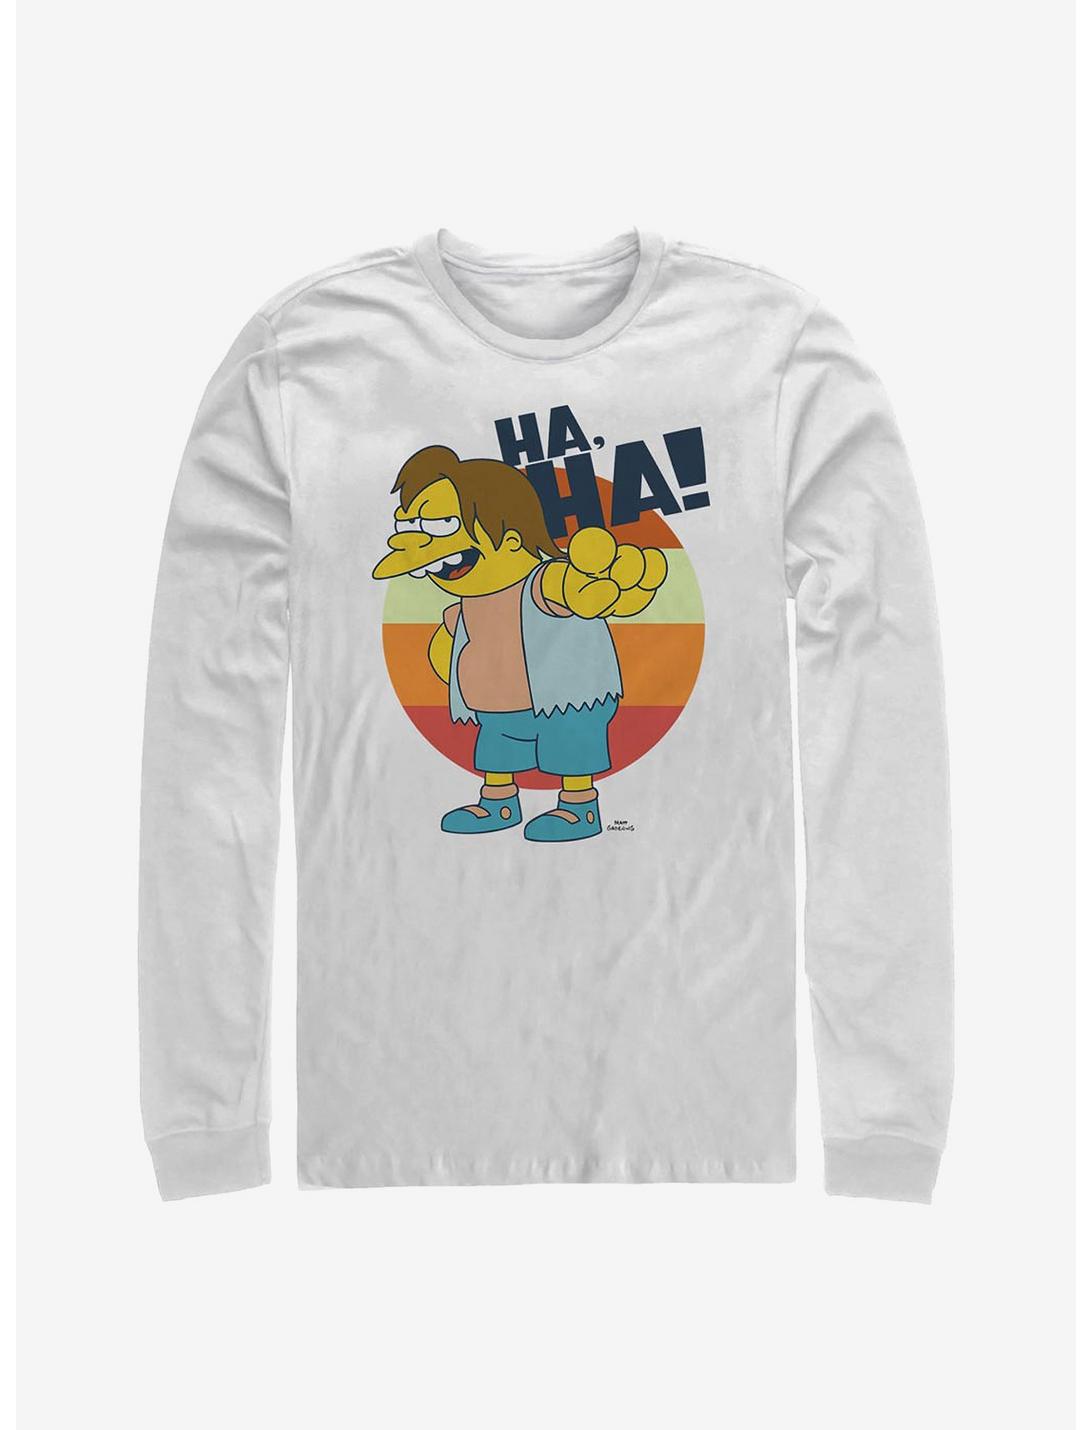 The Simpsons Nelson Haha Long-Sleeve T-Shirt, WHITE, hi-res